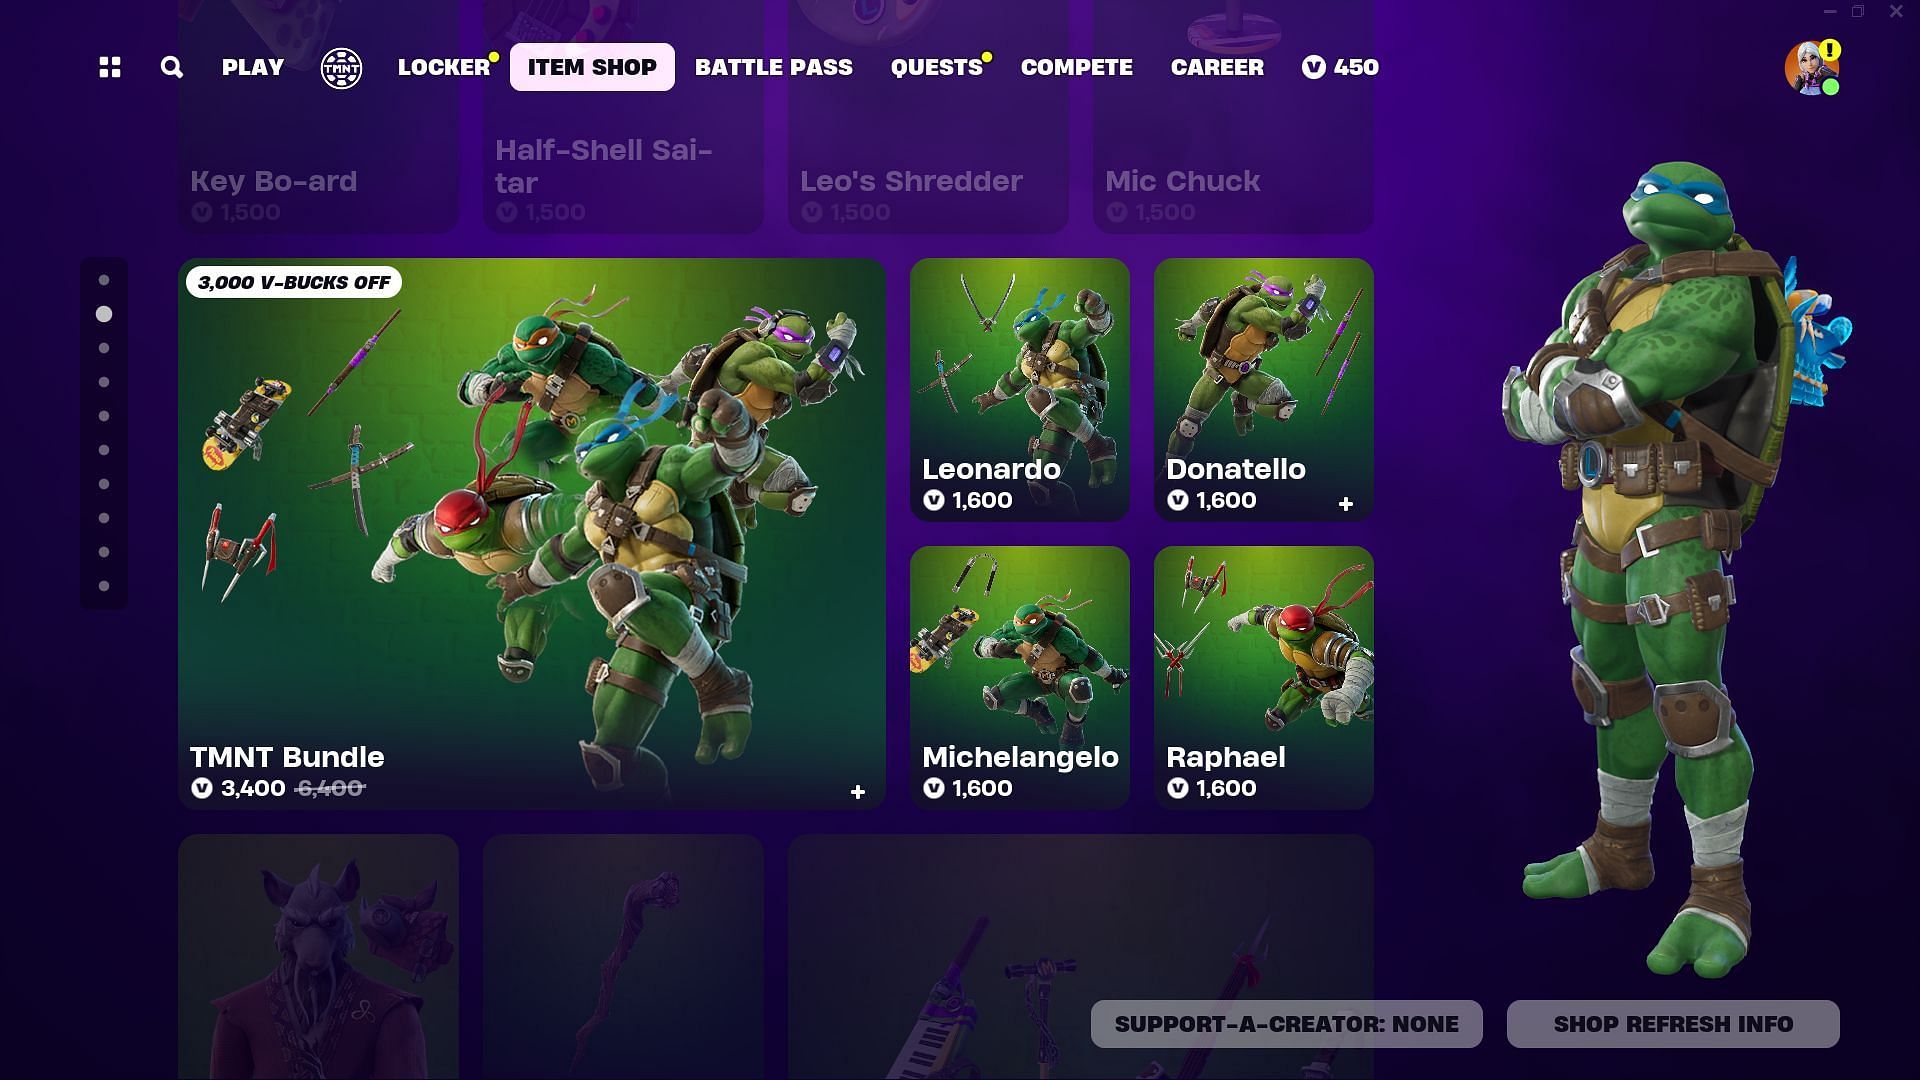 Teenage Mutant Ninja Turtles should stay in the Item Shop until the end of Chapter 5 Season 1 (Image via Epic Games)